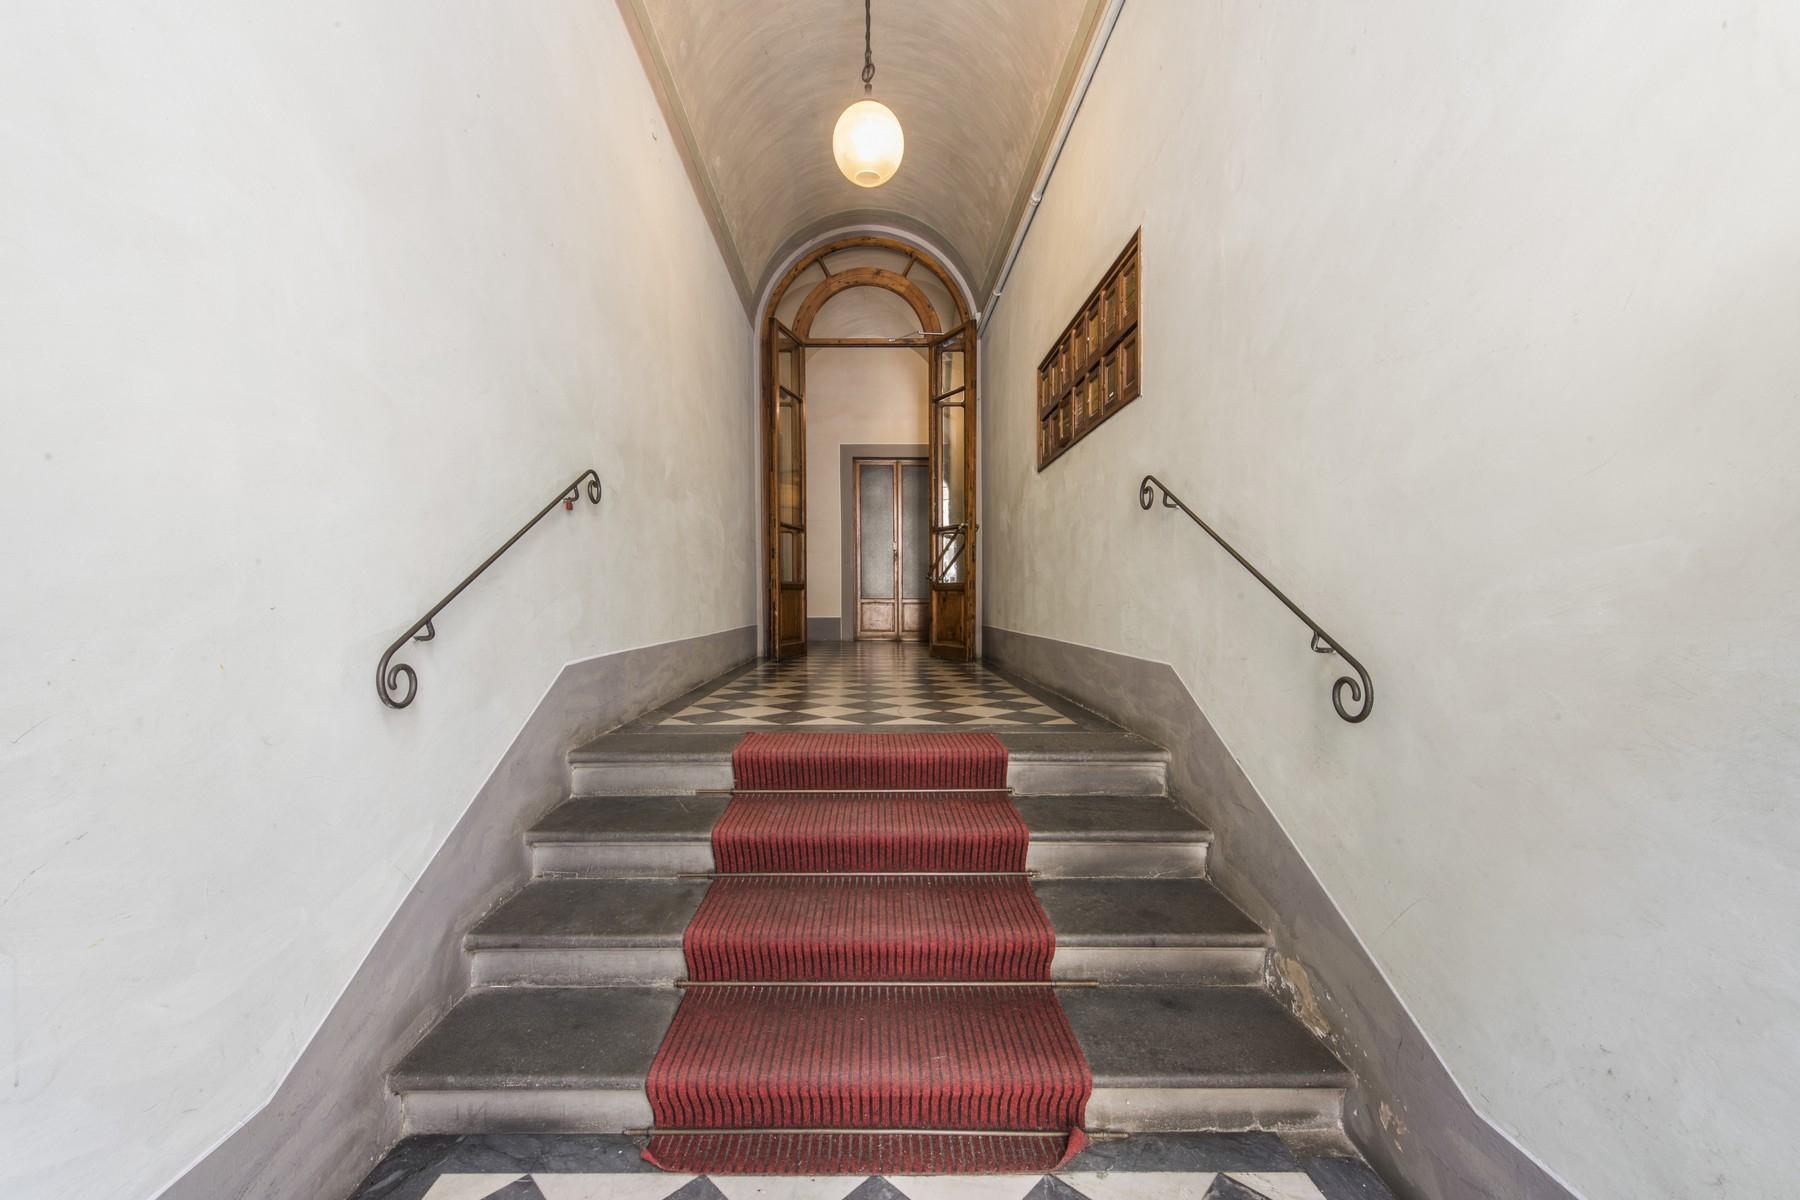 Magnificent 520sqm penthouse in a historic Florentine palazzo. - 11